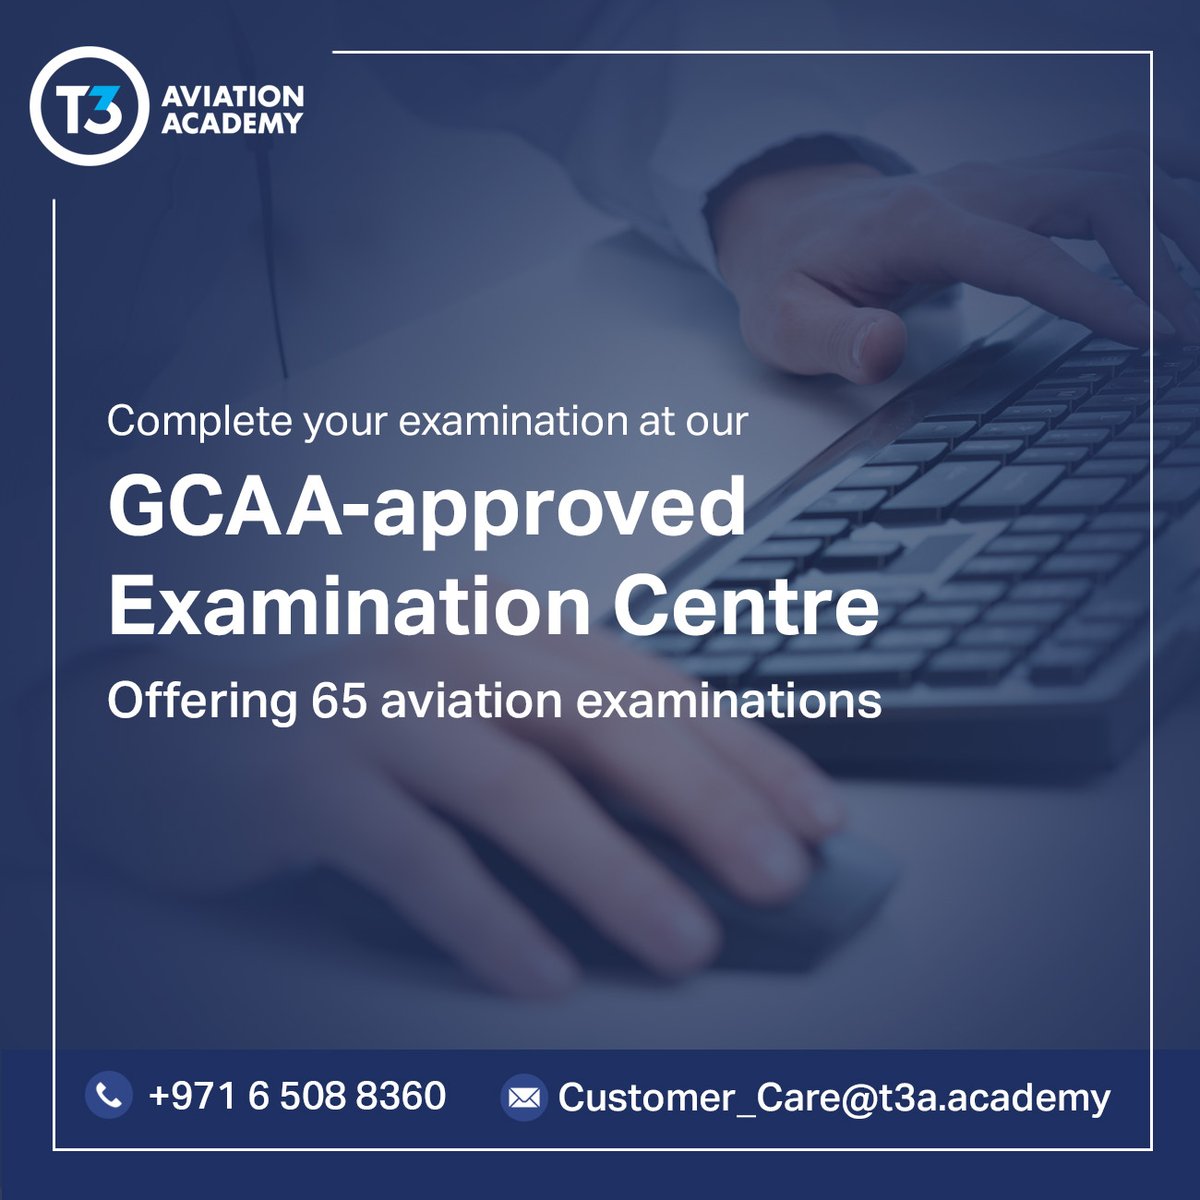 Excel in your examinations with our GCAA-approved Examination Centre equipped with 16 stations fully dedicated to assisting you to conduct your aviation exams.

For more information, visit t3a.academy or send us a message.

#GCAA #AirLaw #CPL #ATPL #MPL #aviation